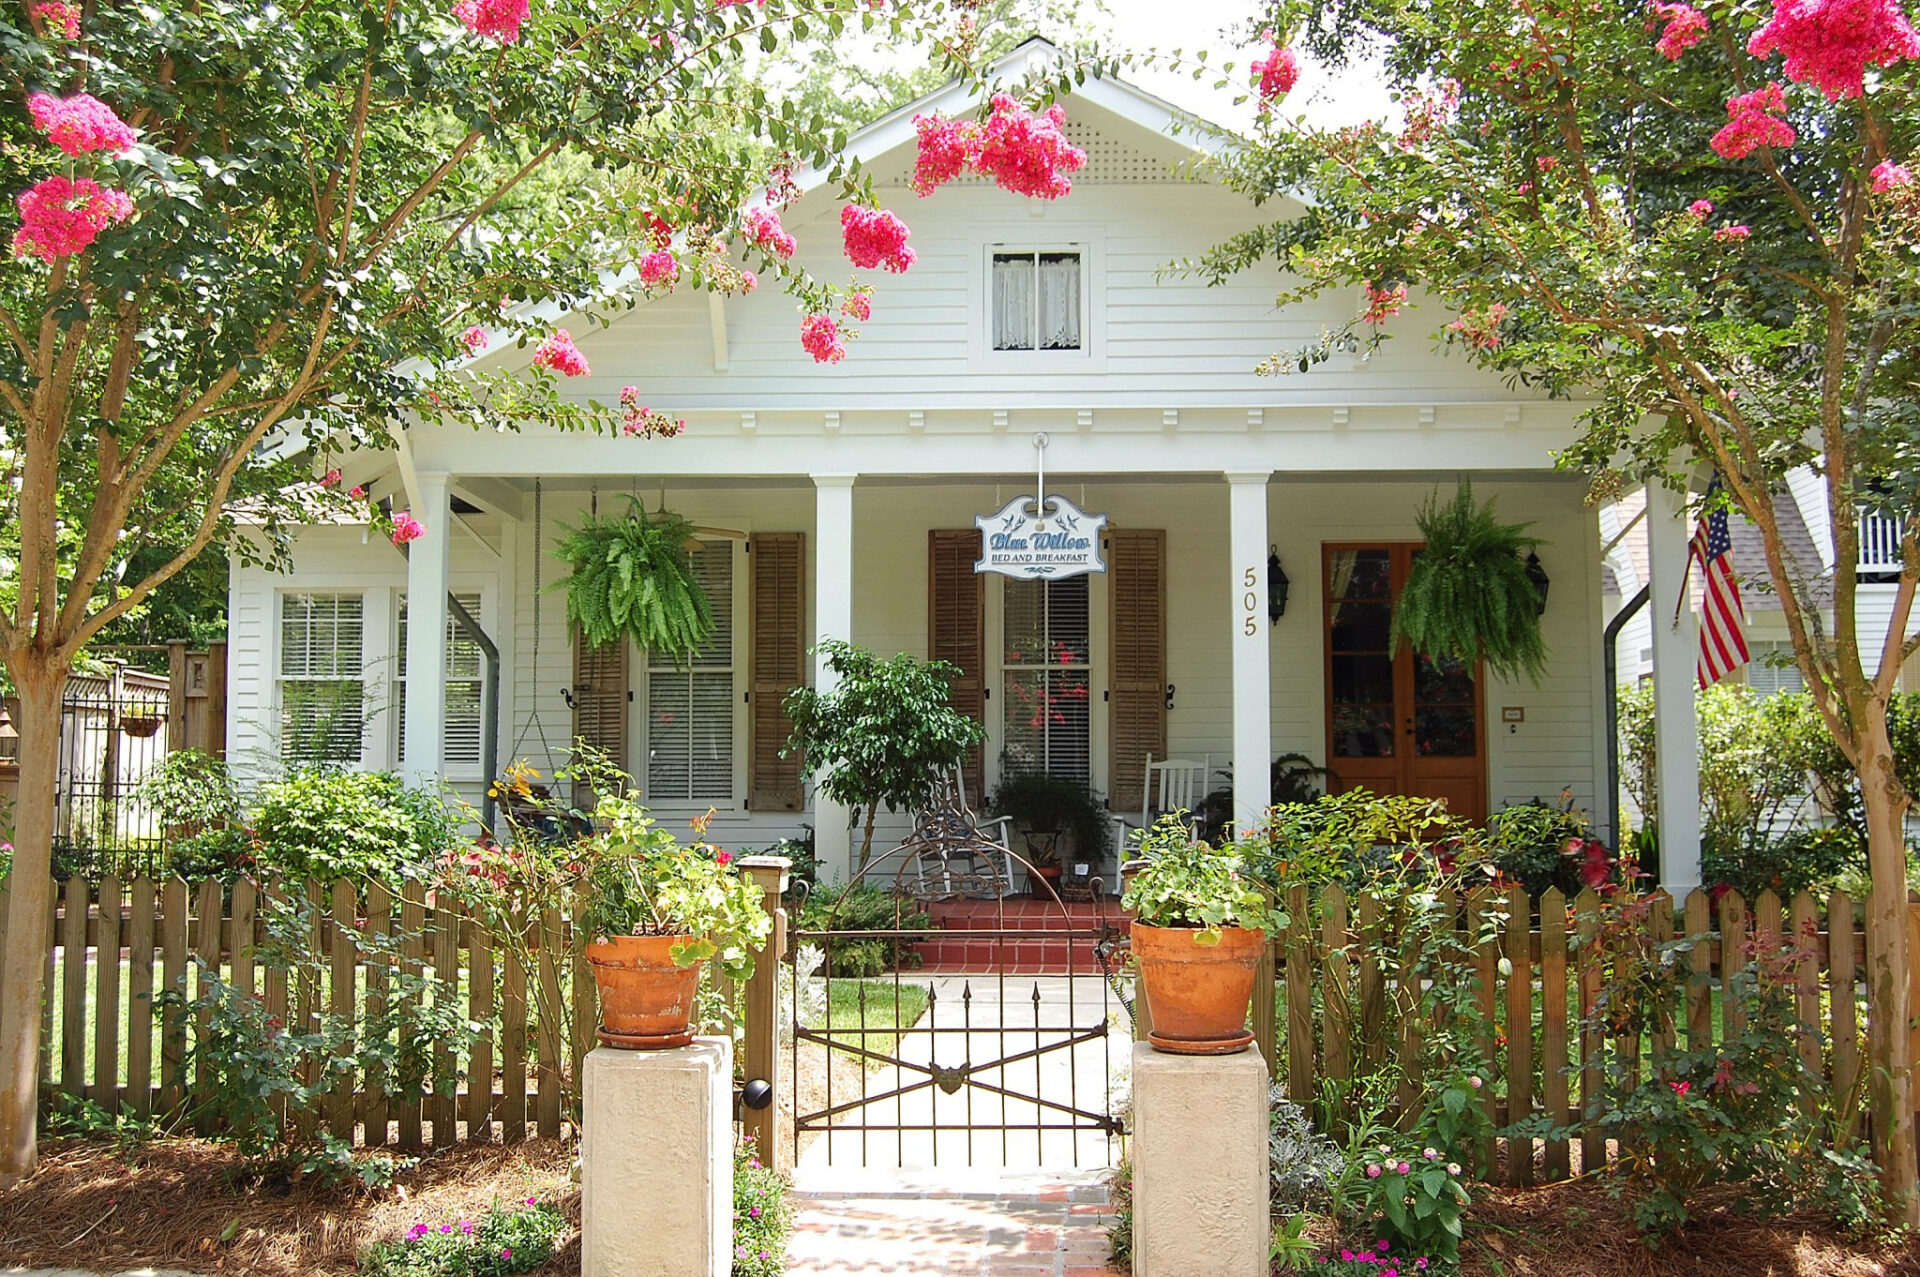 Vlue Willow Bed and Breakfast Entrance with blooming crepe myrtles 